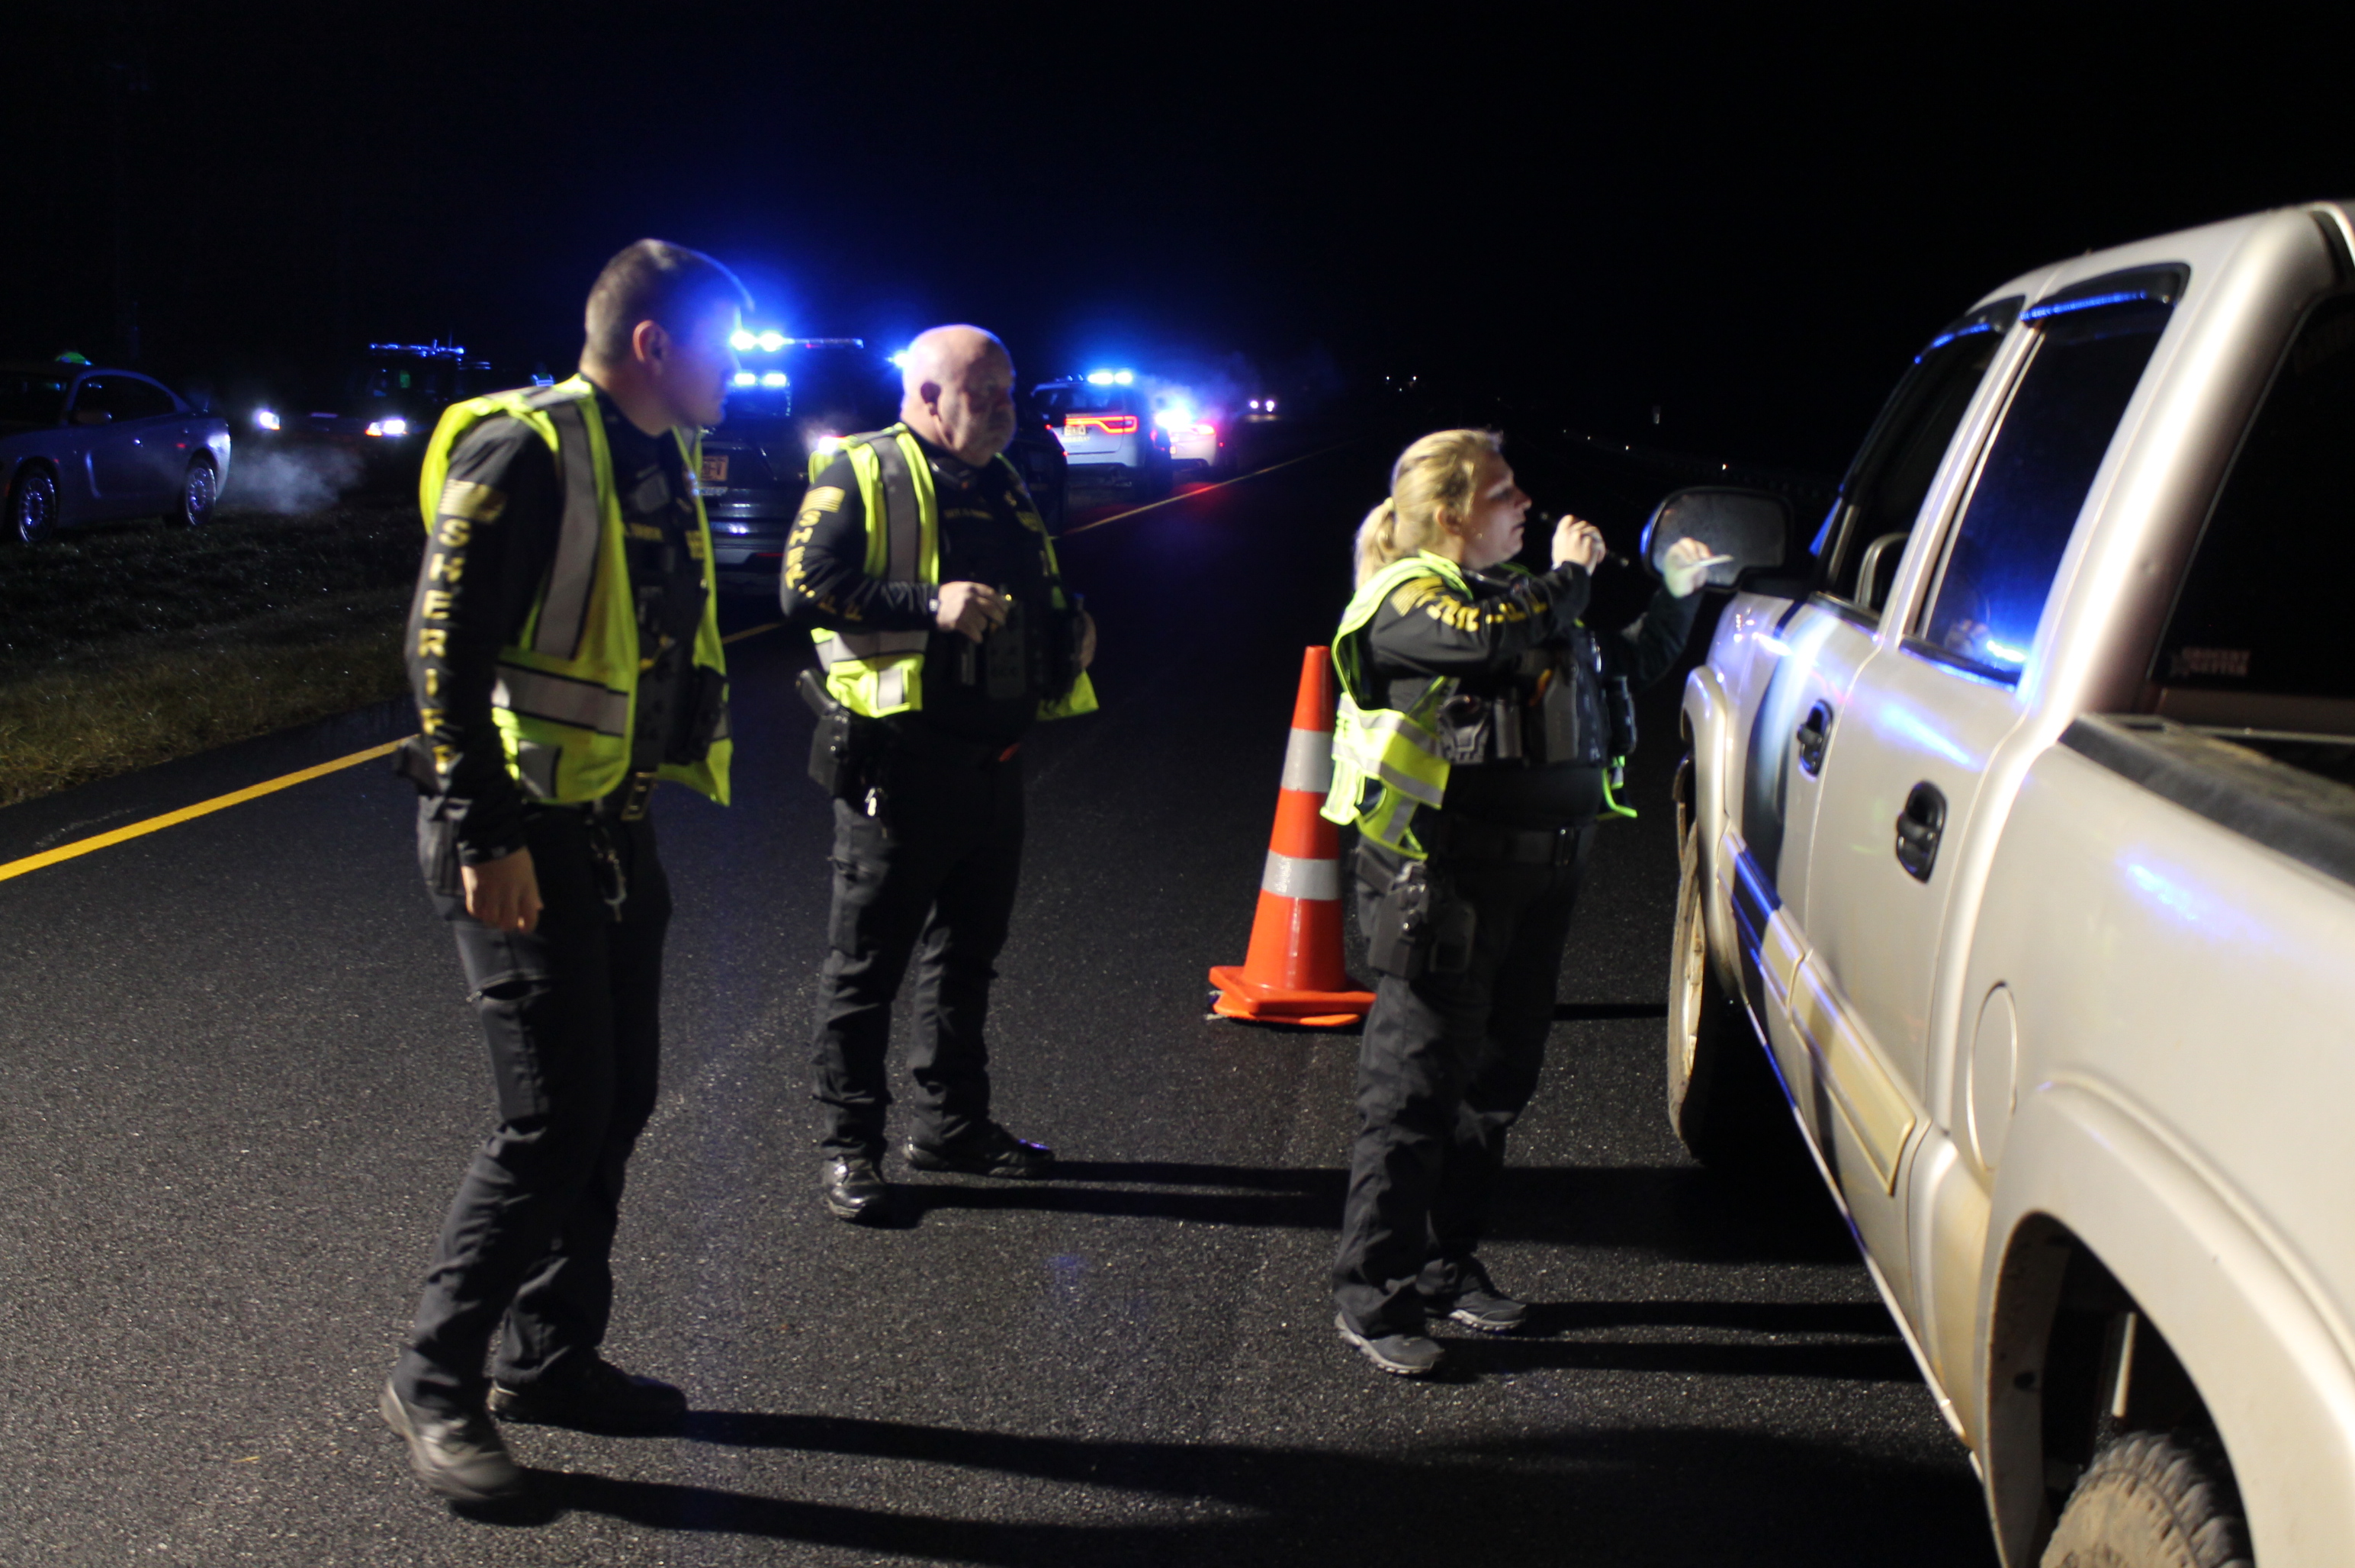 Swain County Sheriff's Office Deputy Barnes, along with Deputy Tabor and Sergeant Barnes check driver's licenses and tags during the multi-agency DWI checkpoint held on New Year's Eve that resulted in 27 citations.